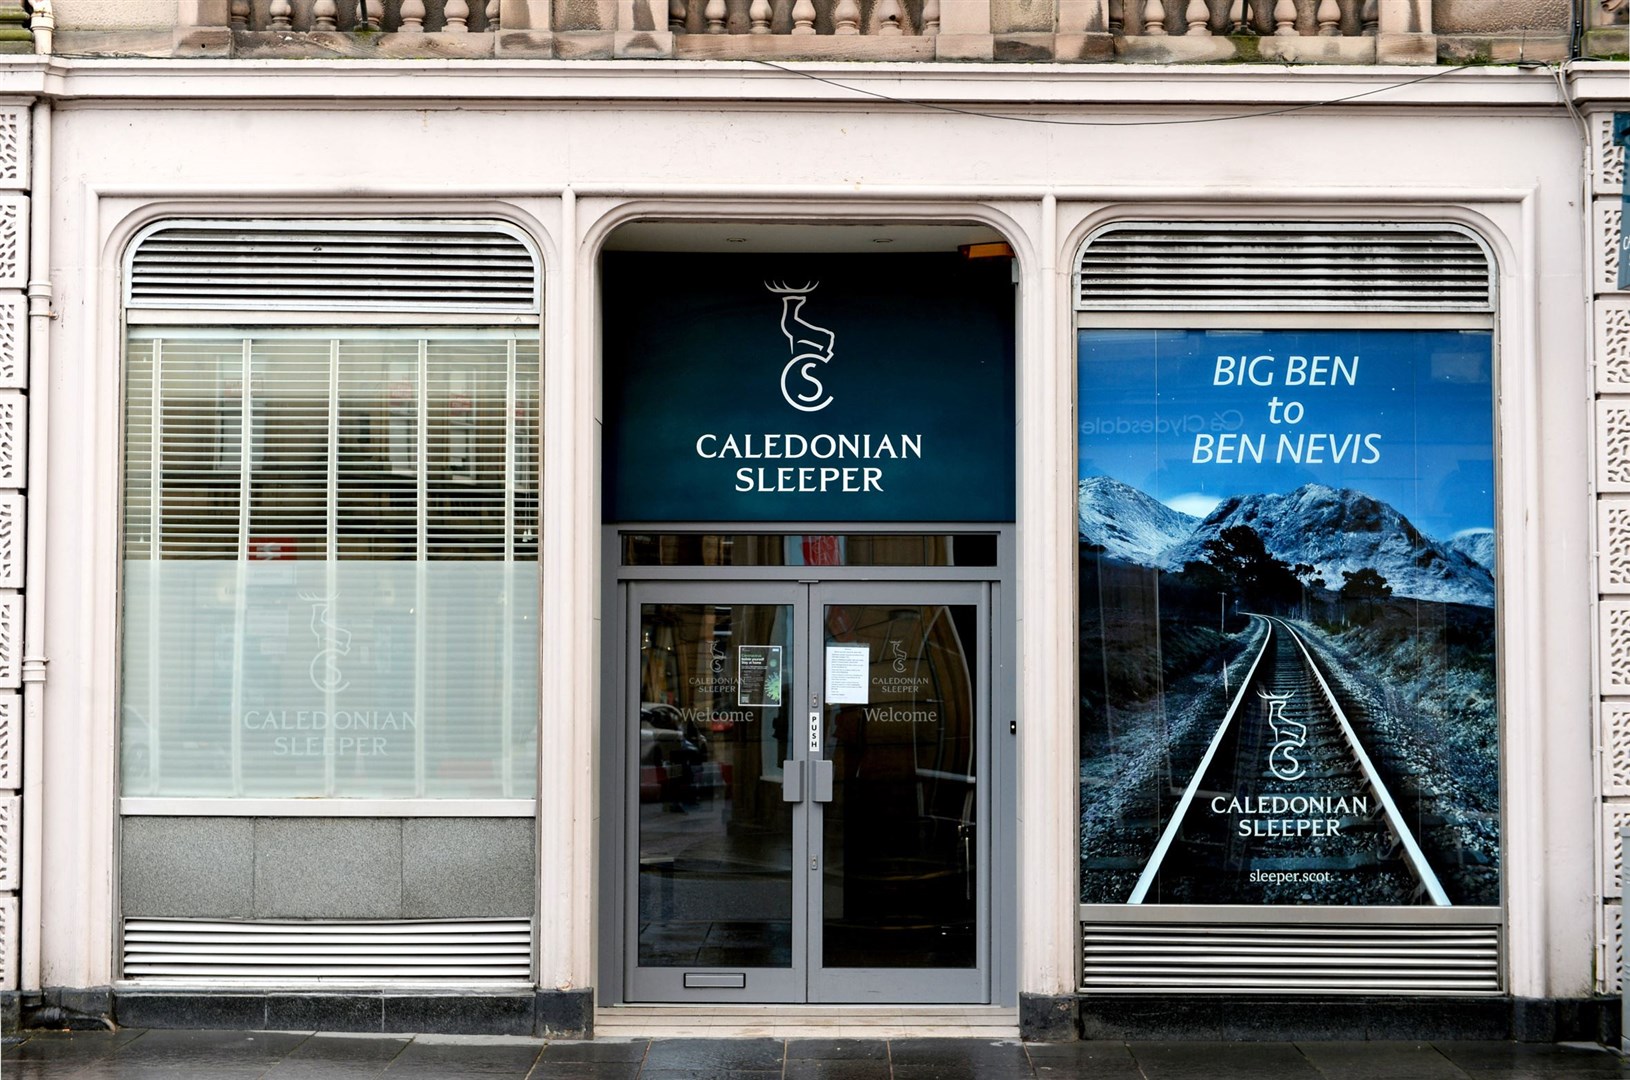 The Caledonian Sleeper which provides an important direct rail link between the UK and Highland capitals has a guest lounge in Union Street, Inverness, for travellers.